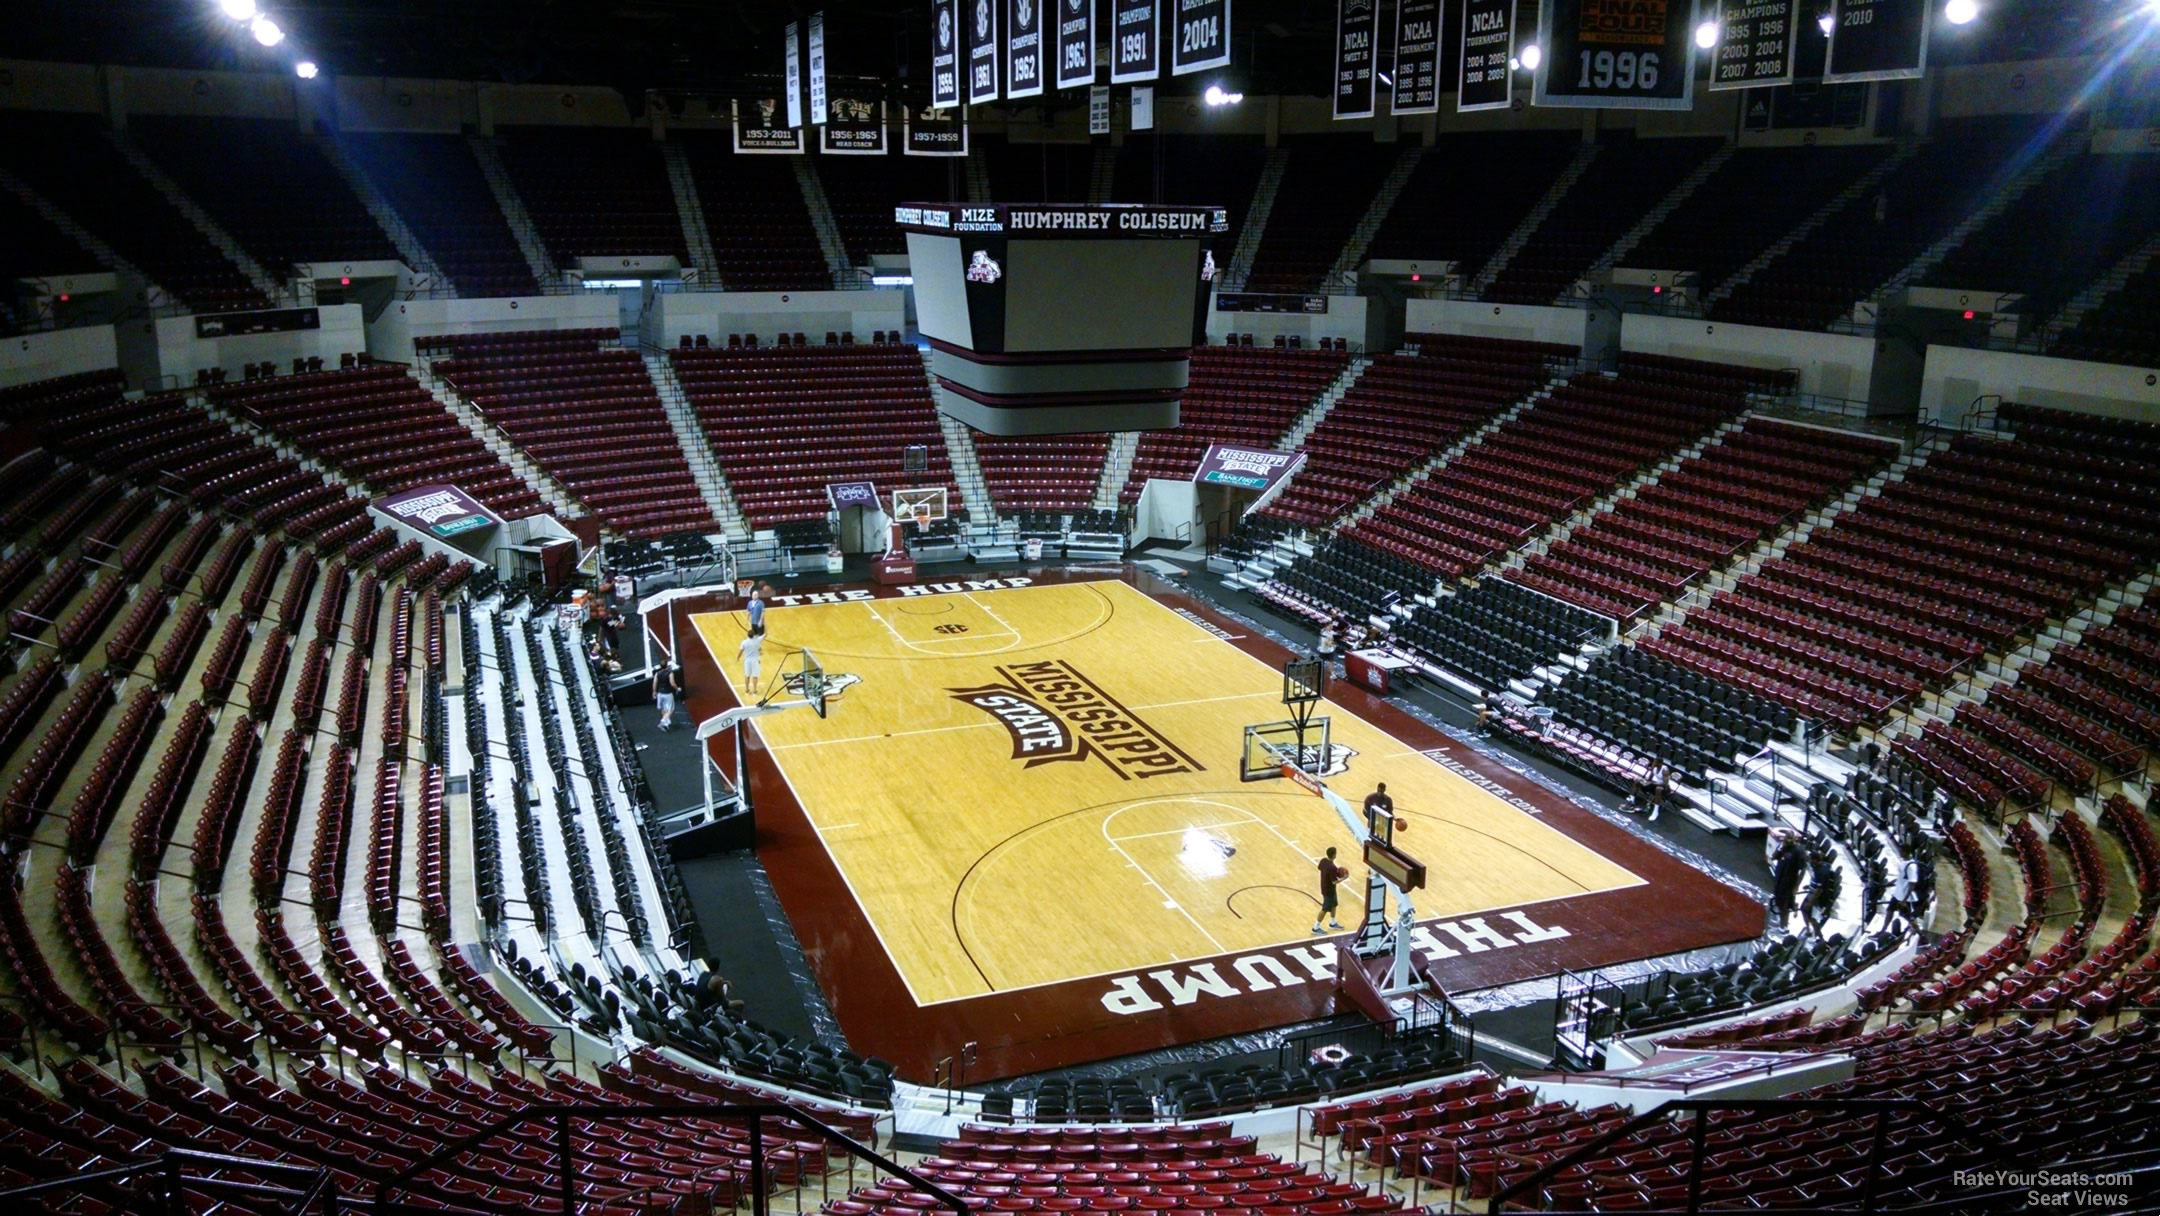 section 203, row 8 seat view  - humphrey coliseum